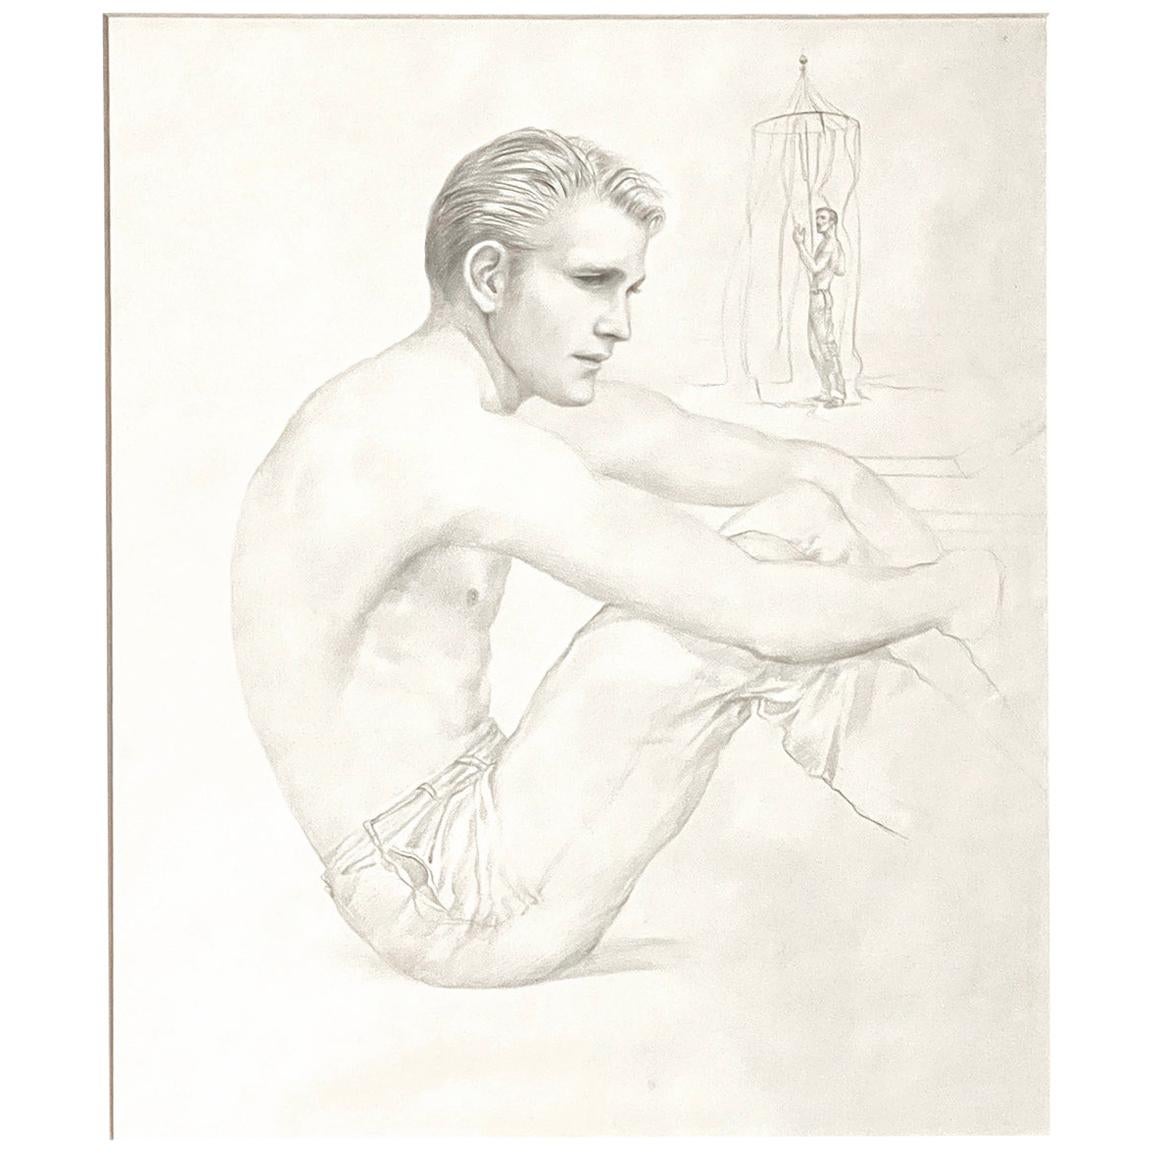 "Seated Male Figure, Beachside," Early Drawing by John B. Lear with Cabana